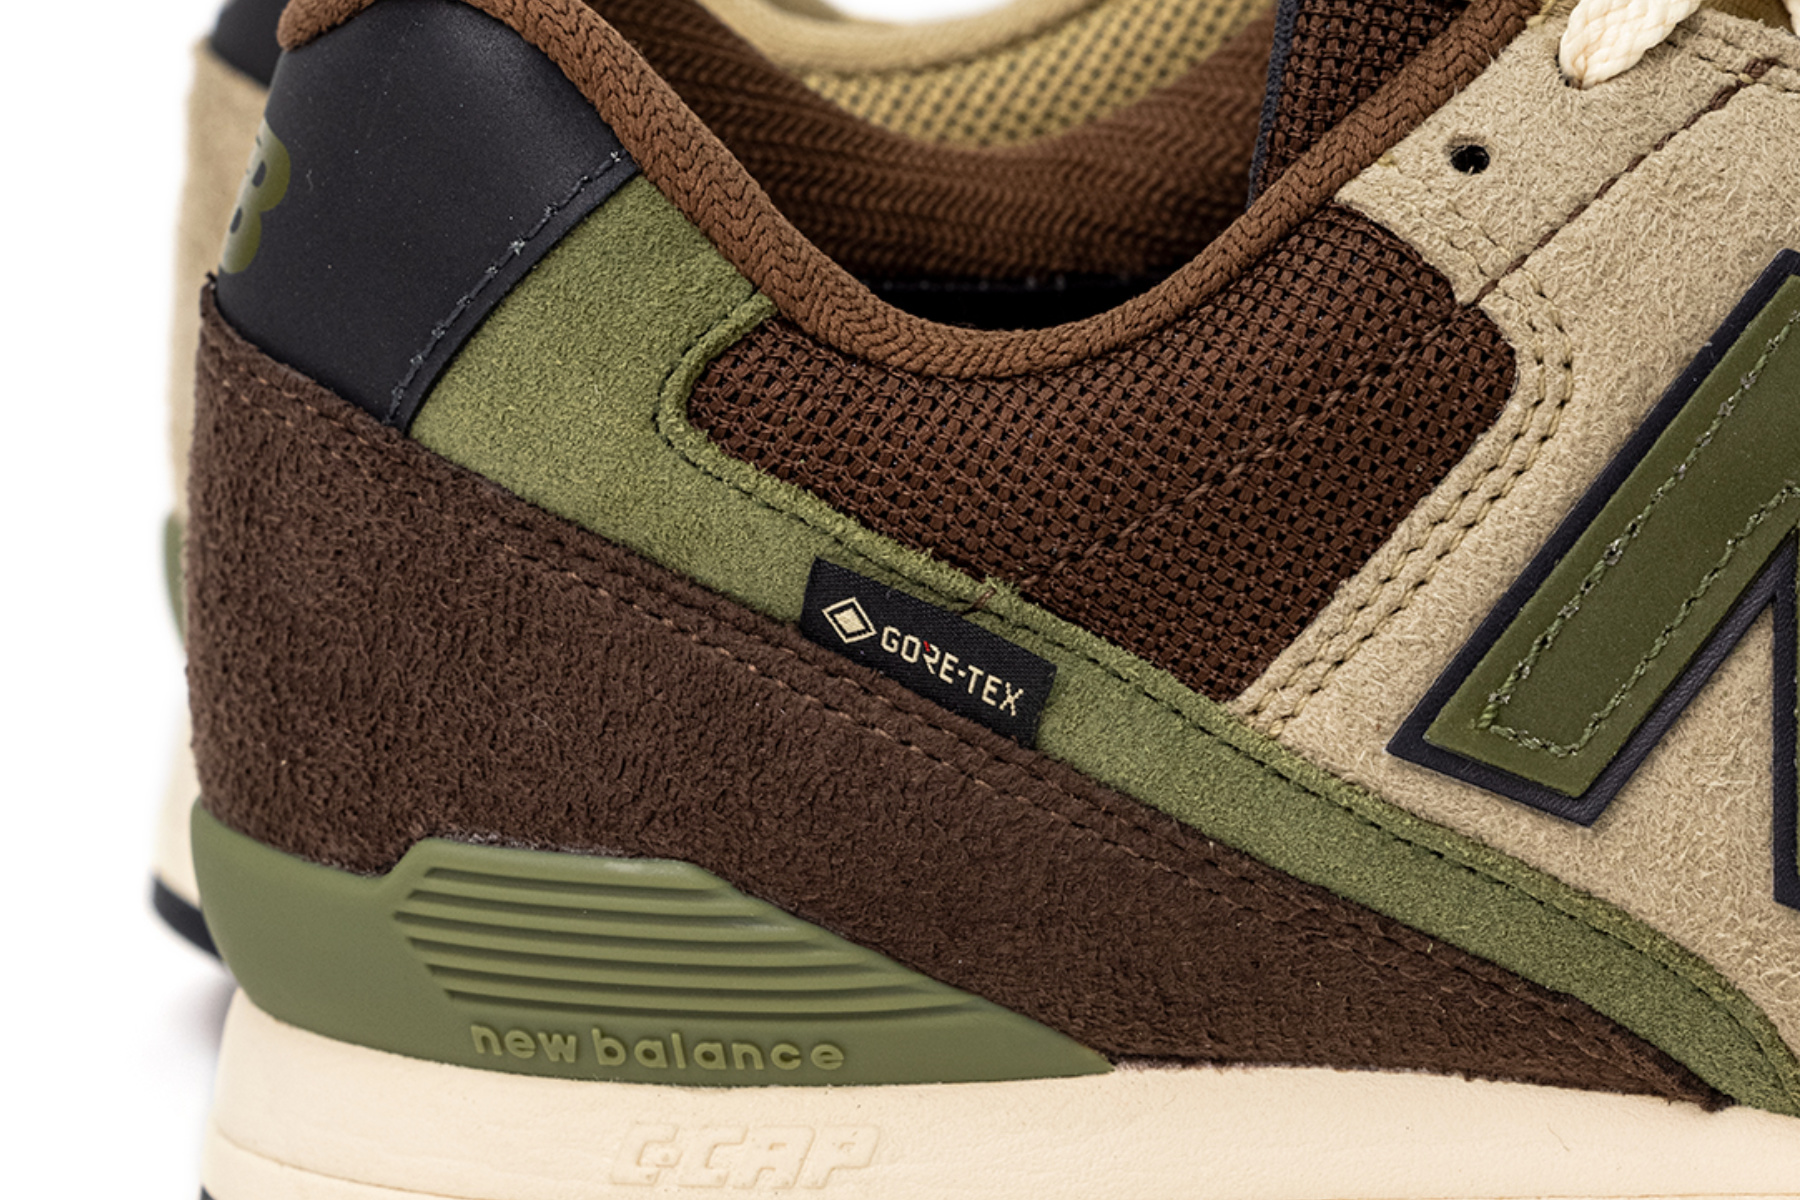 BEAMS' New Balance 996 is a perfectly autumnal GORE-TEX take on a heritage sneaker.